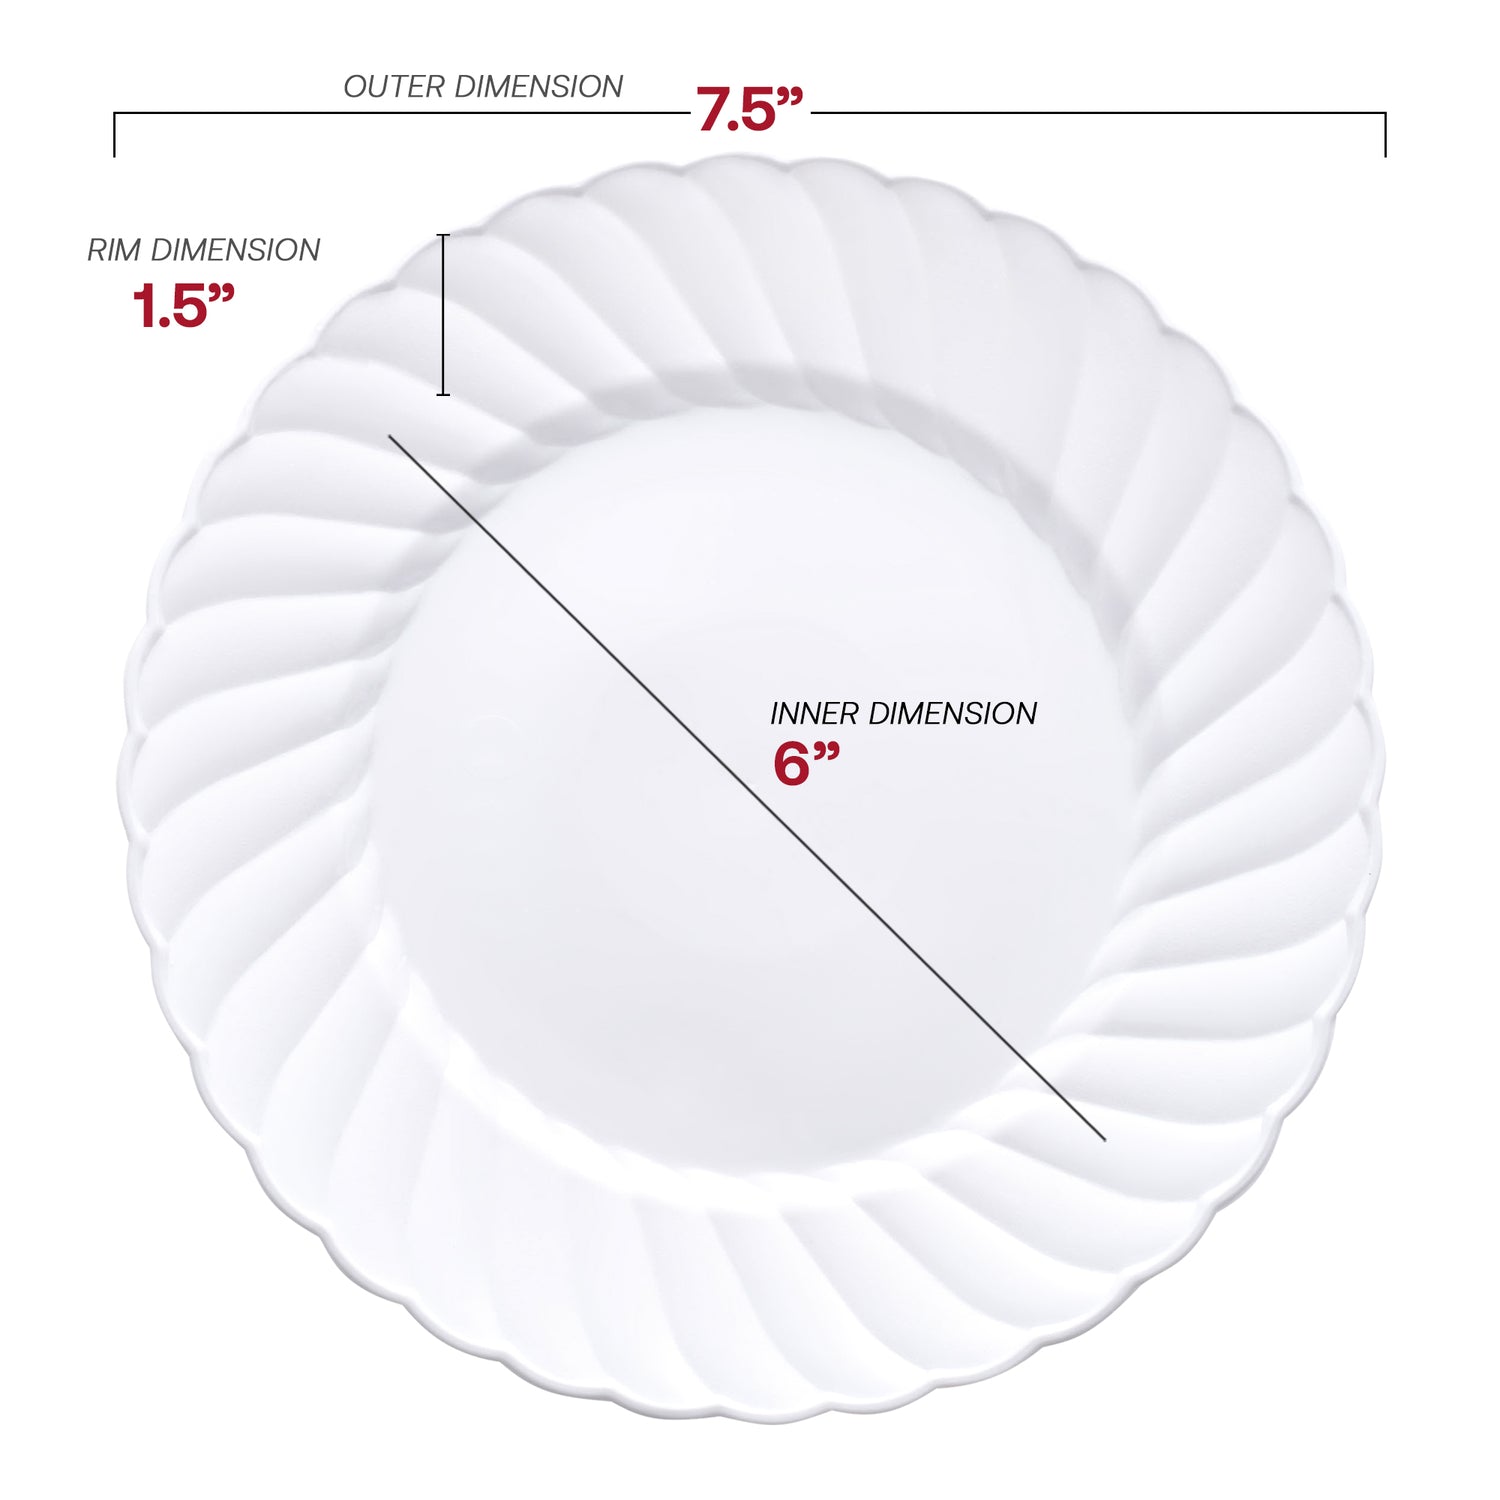 White Flair Plastic Appetizer/Salad Plates (7.5") Dimension | The Kaya Collection